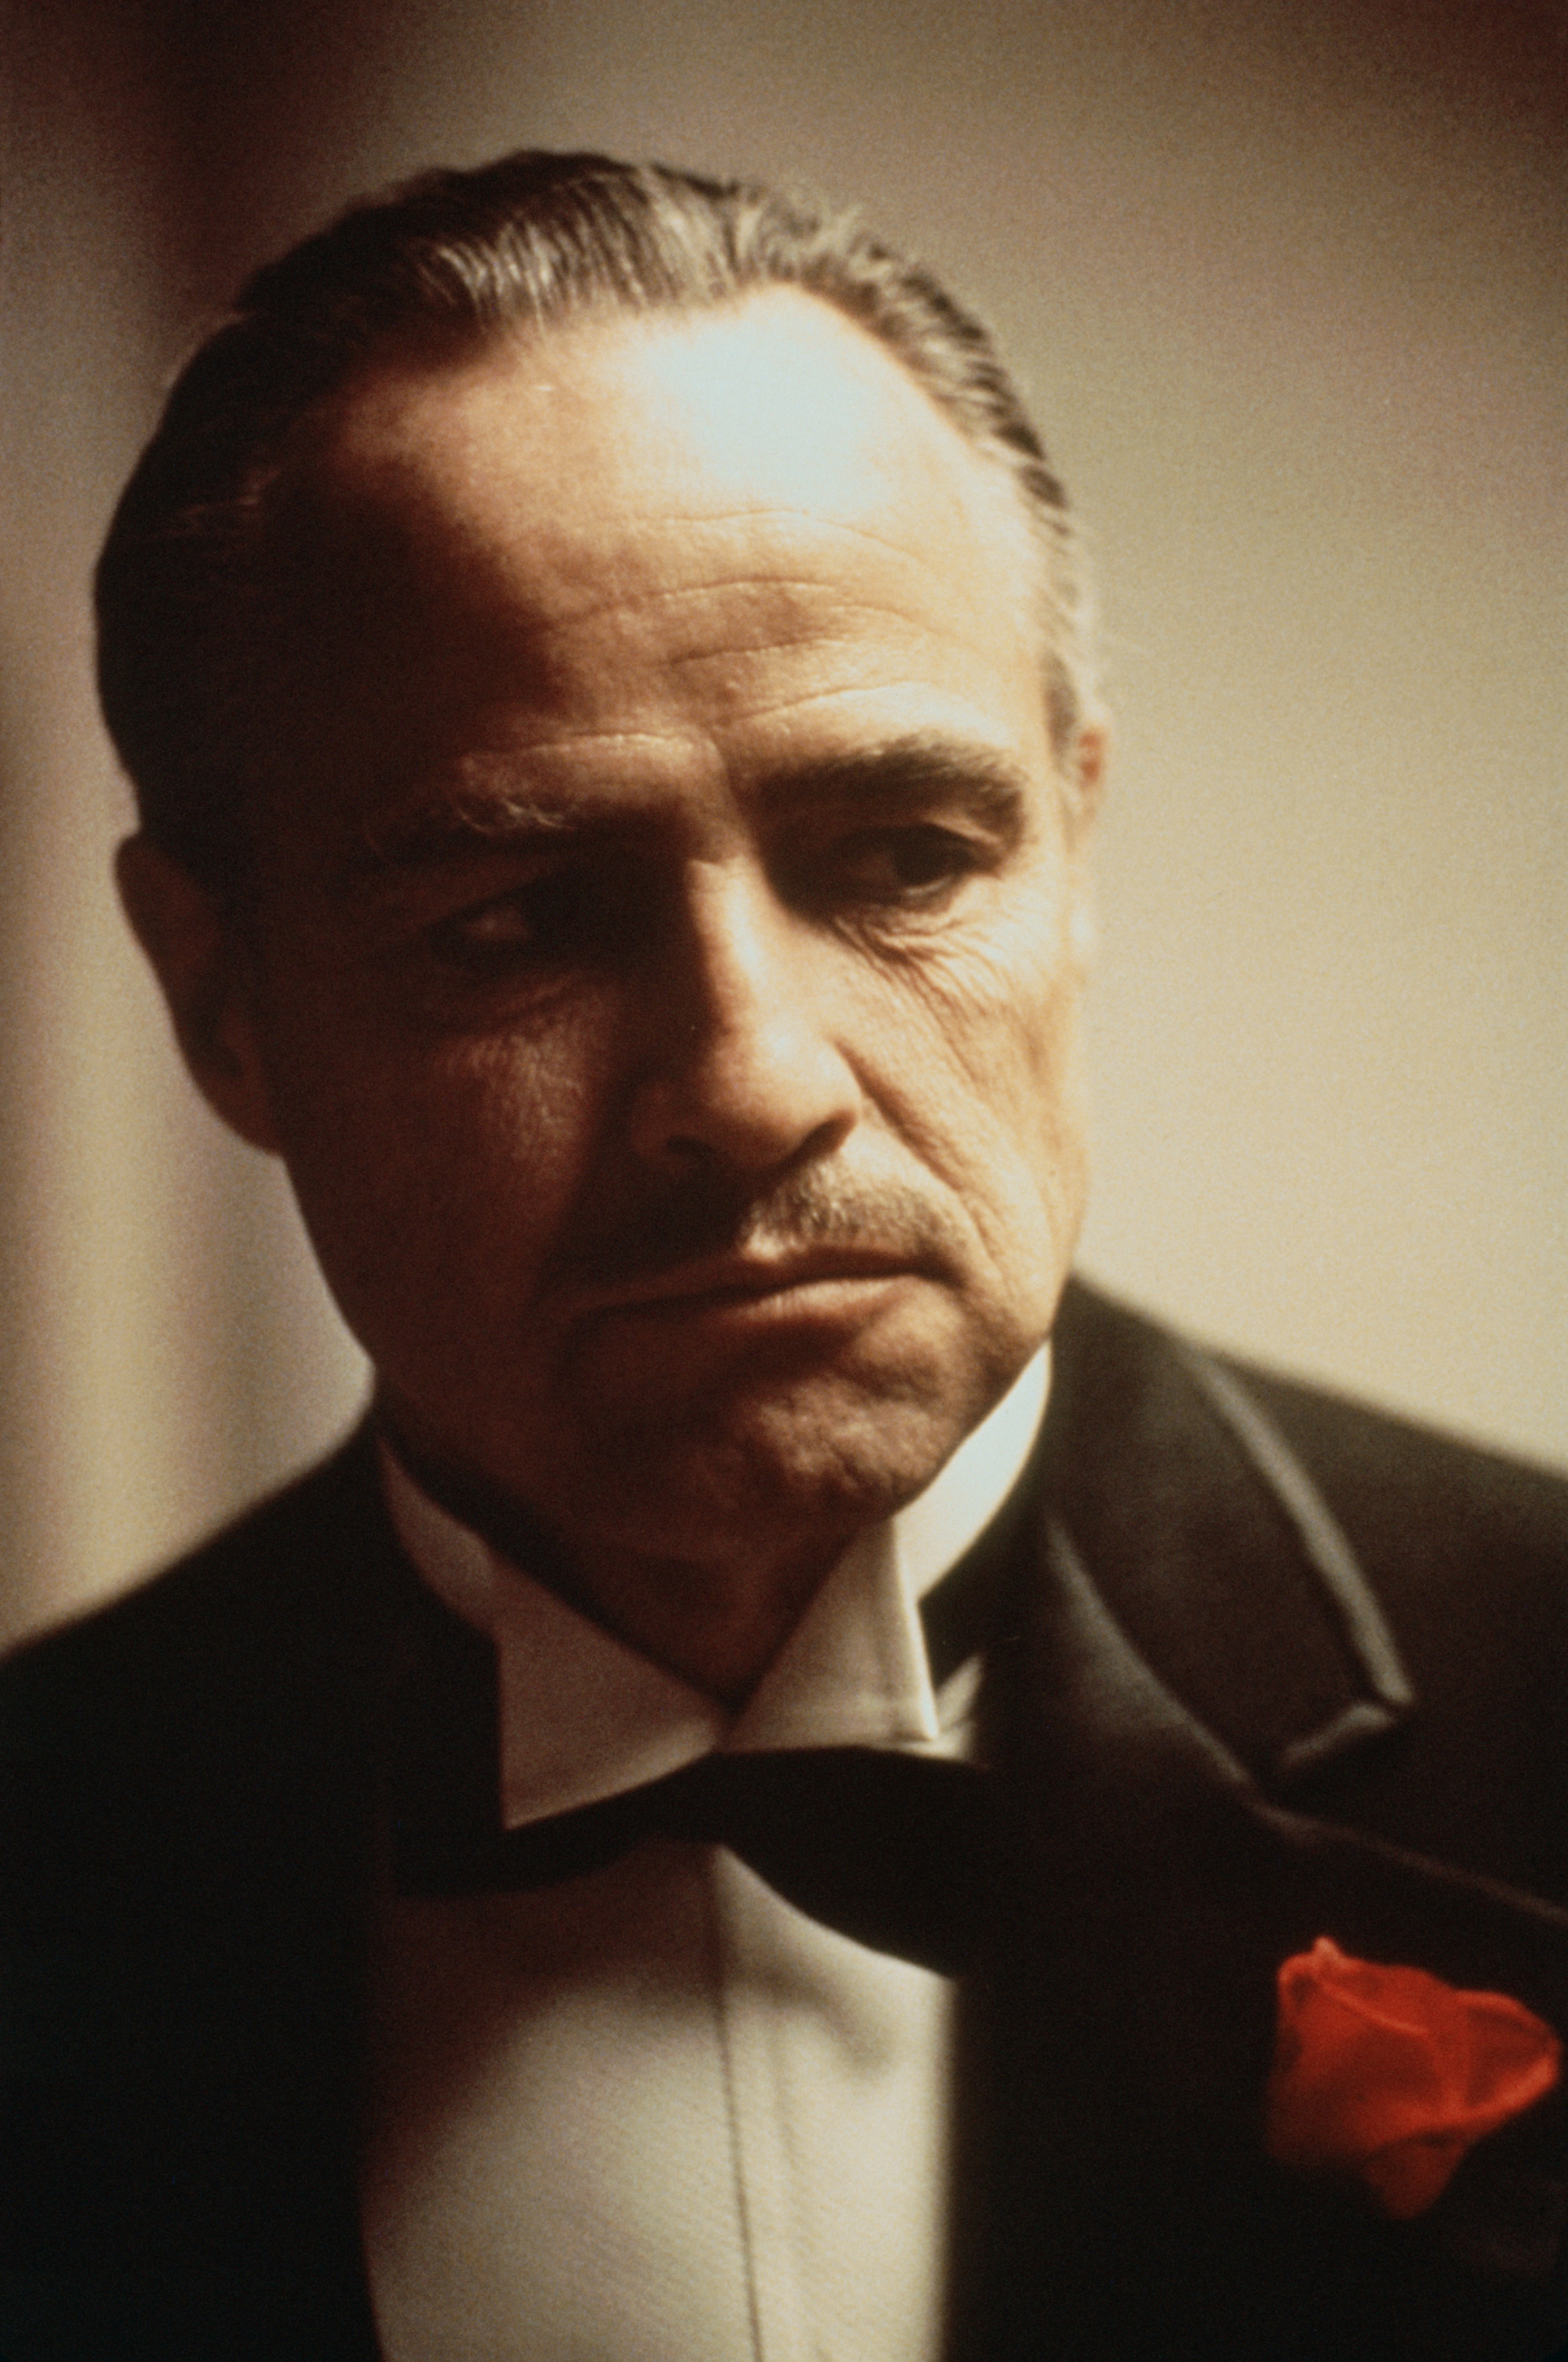 All The Right Movies on X: Today, THE GODFATHER is recorded as